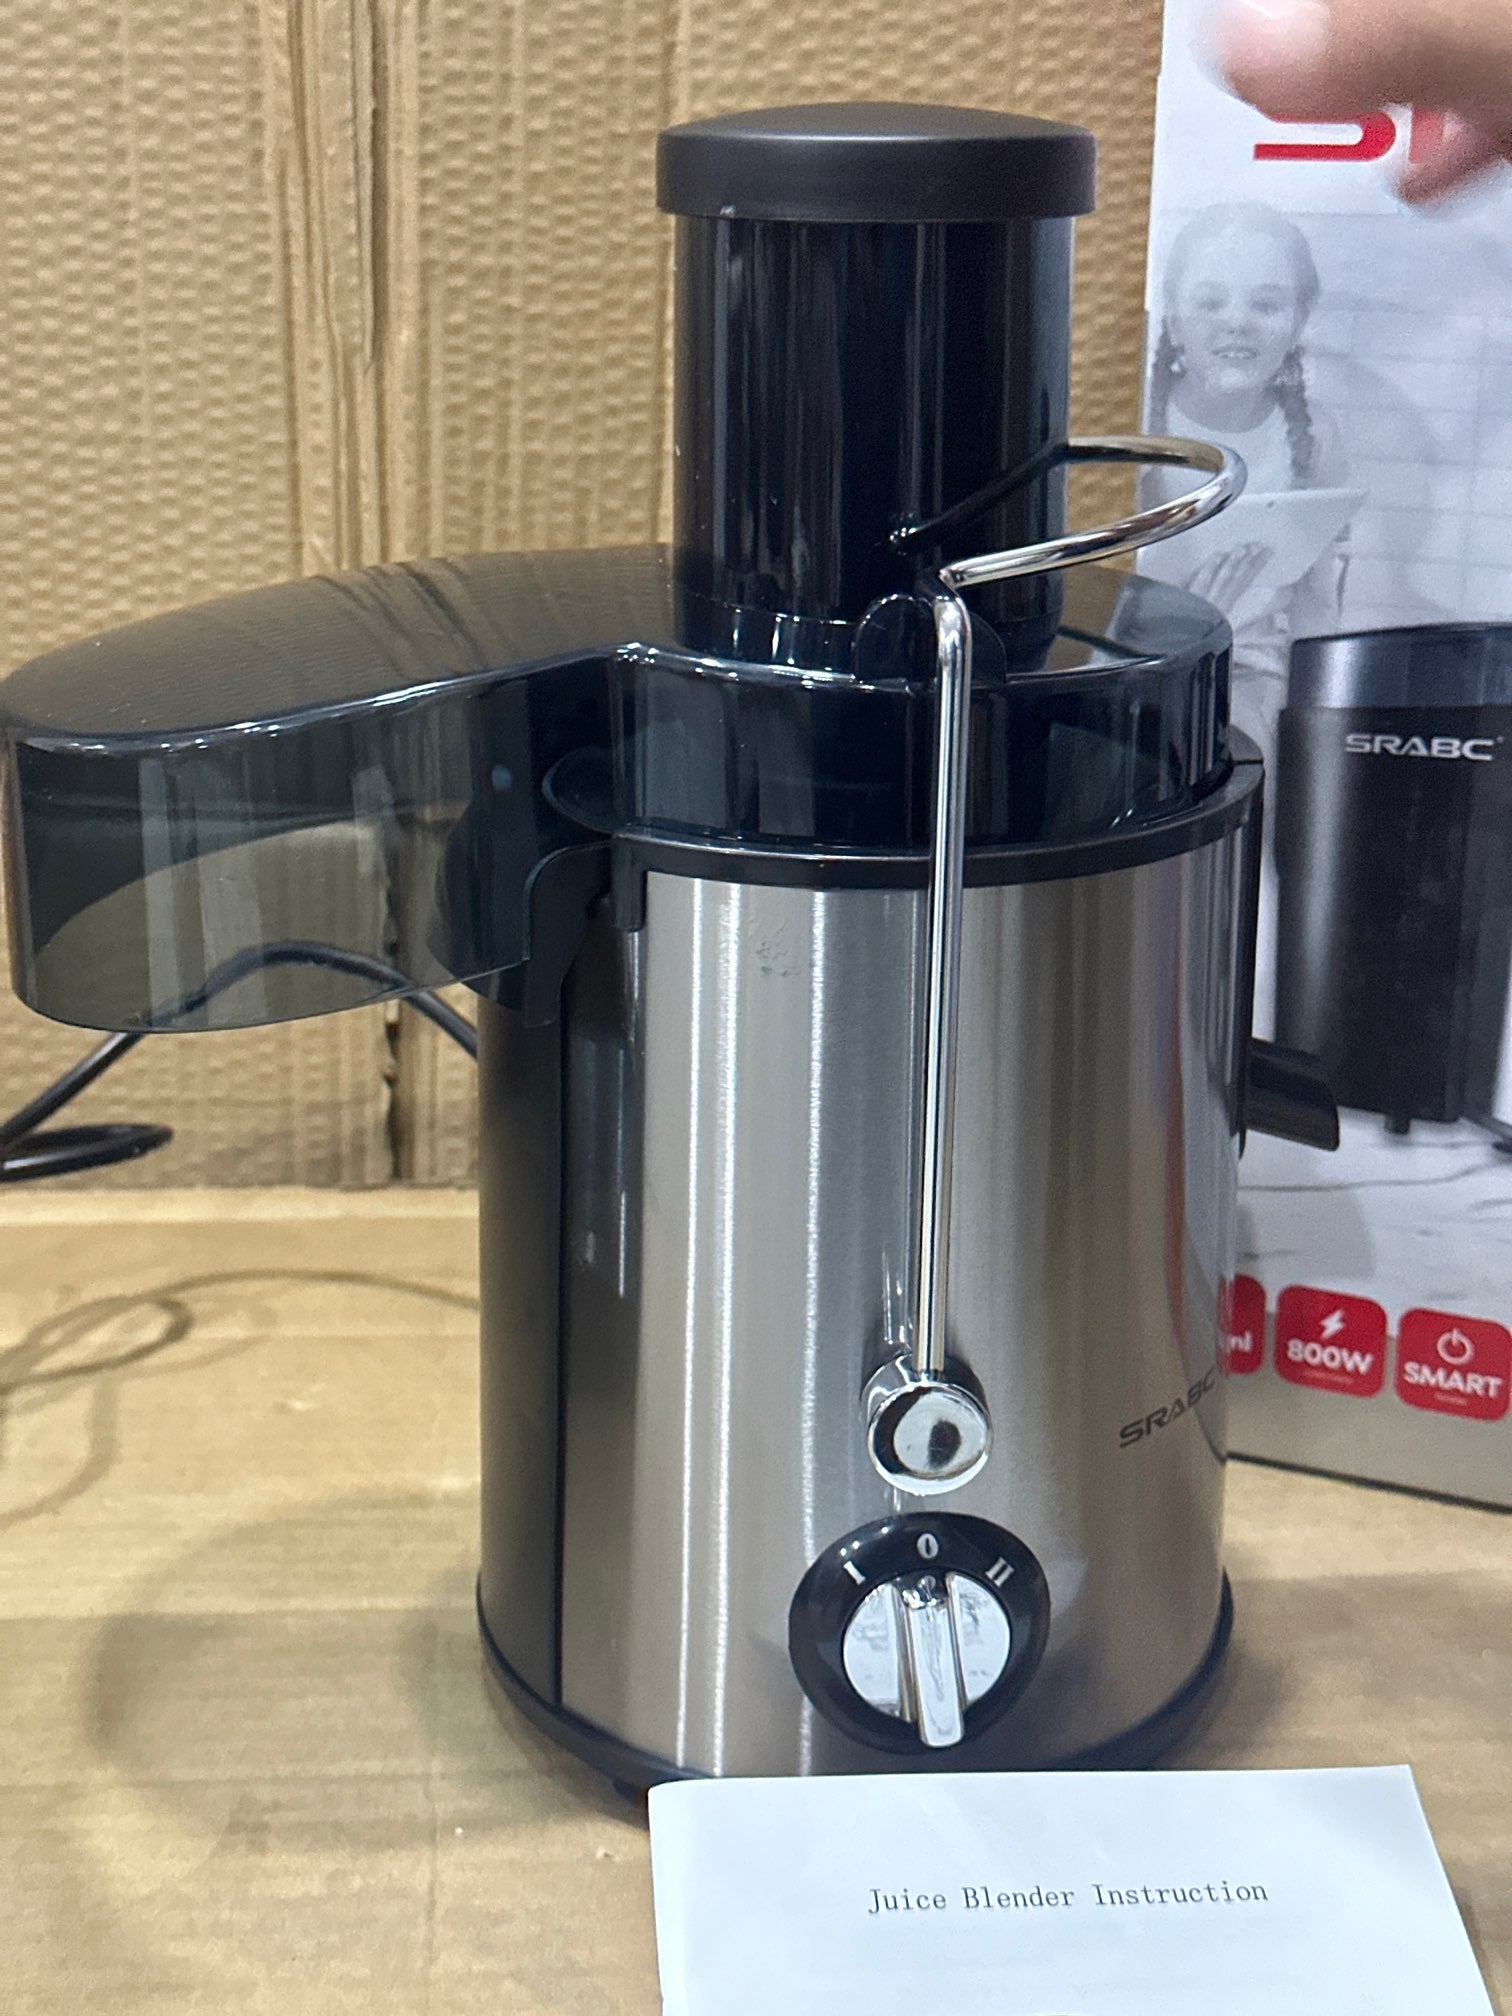 Lot imported Srabc juice extractor